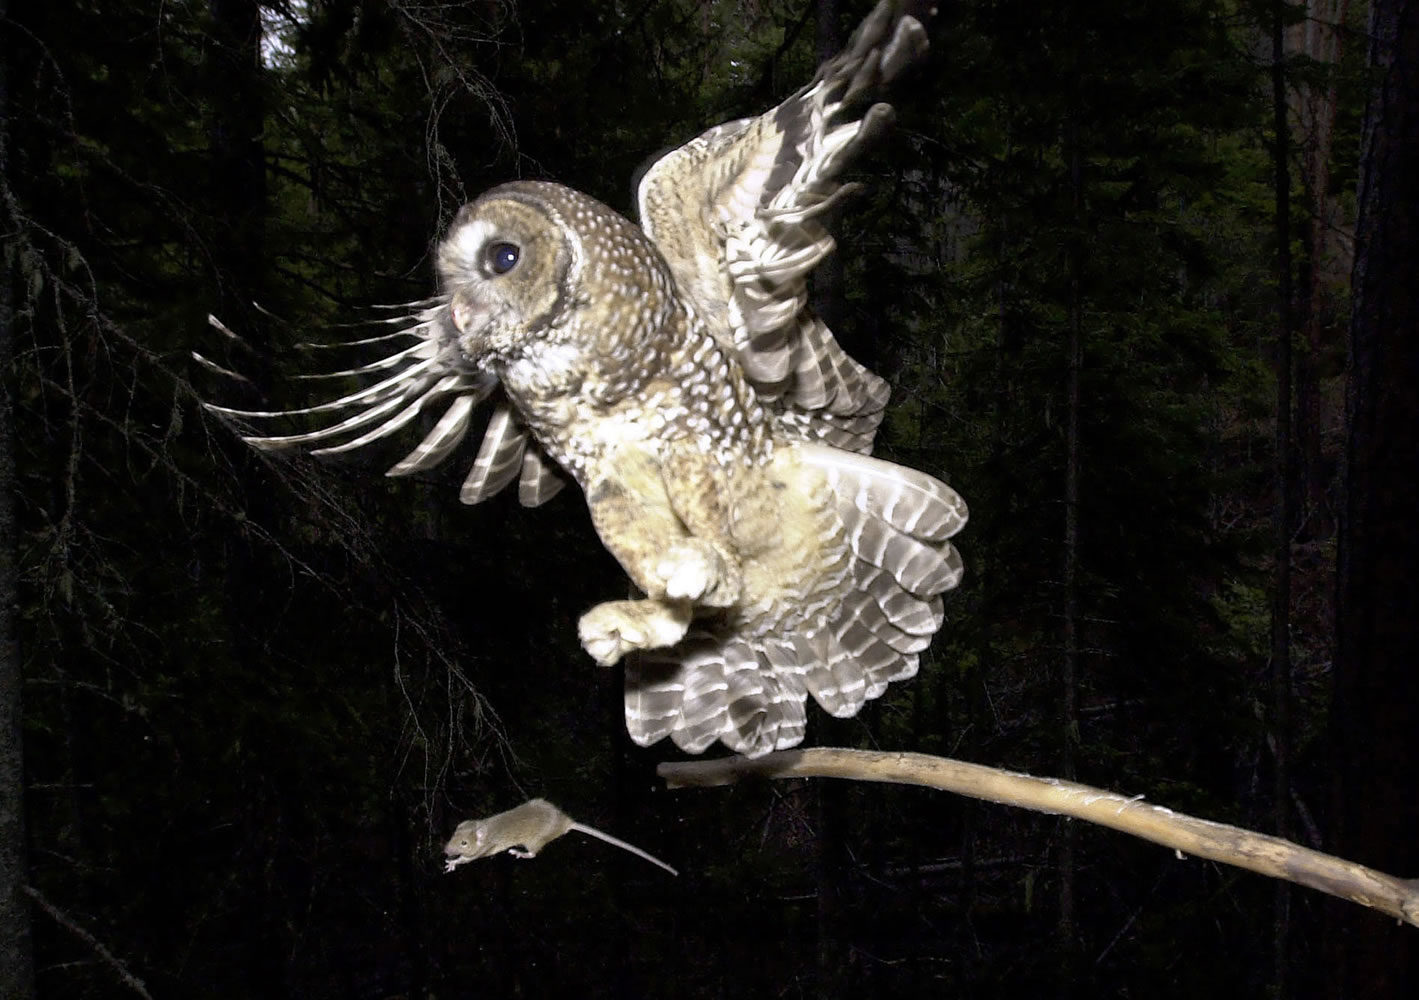 A northern spotted owl, named Obsidian by U.S. Forest Service personnel, flies after an elusive mouse that had been sitting on the end of a stick in the Deschutes National Forest near Camp Sherman, Ore., on May 8, 2003.